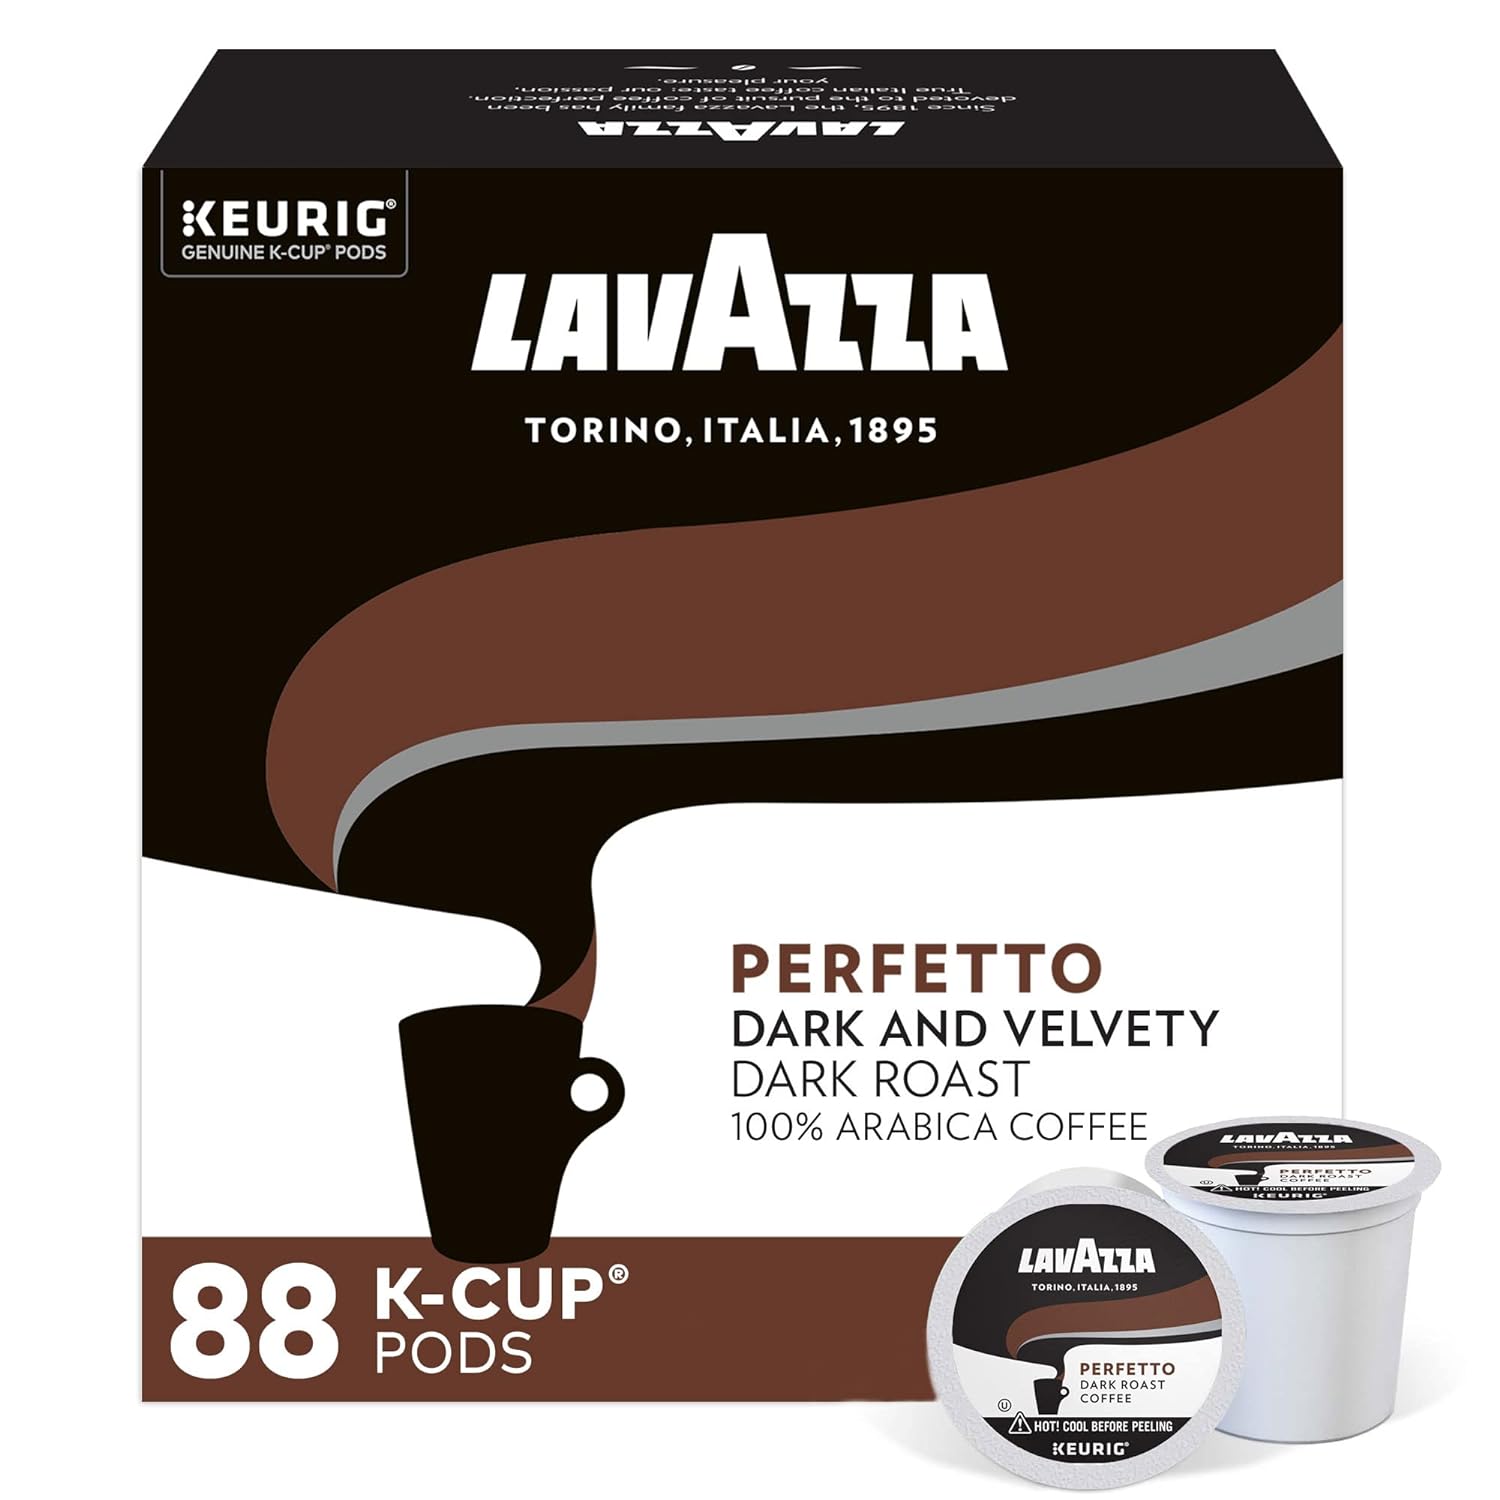 Prime Members: 88-Count Lavazza Perfetto Dark Roast Single-Serve Coffee K-cup Pods $26.50 ($0.30 each) w/ S&S + Free Shipping